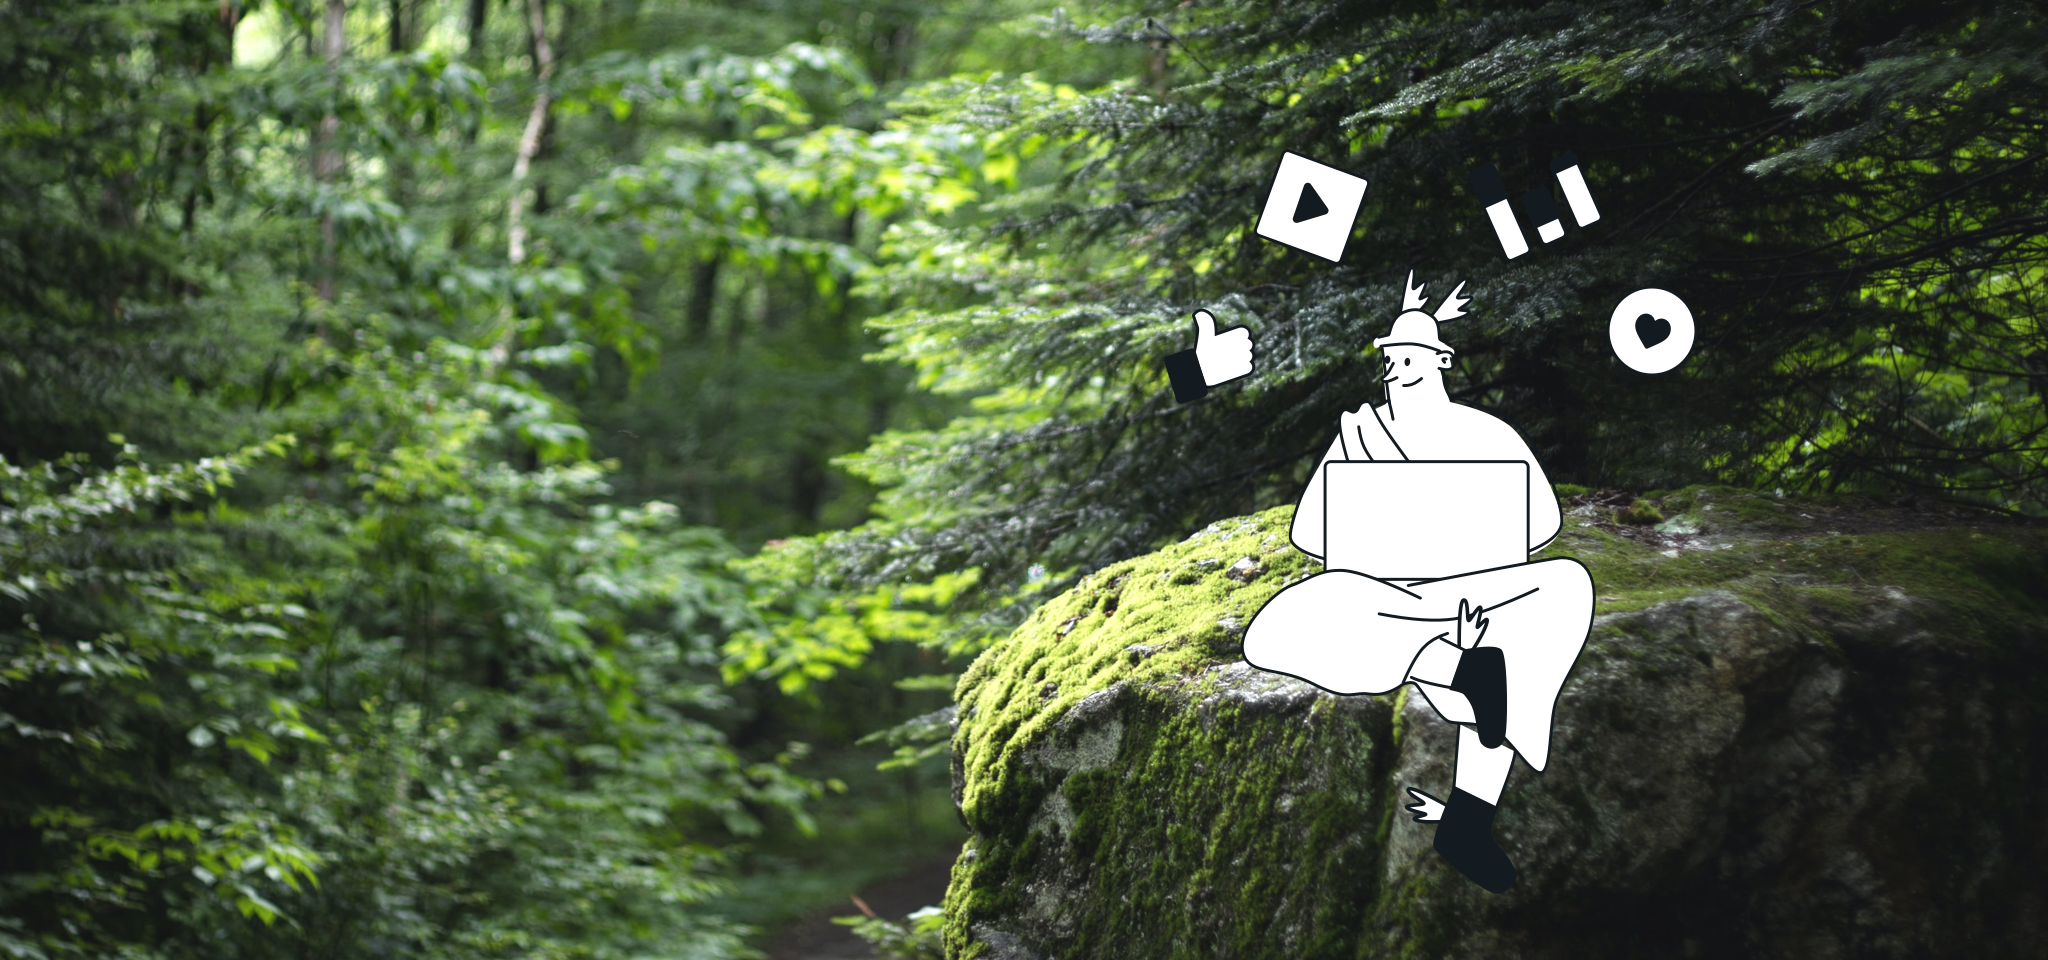 Hermes working with his laptop in the middle of the forest